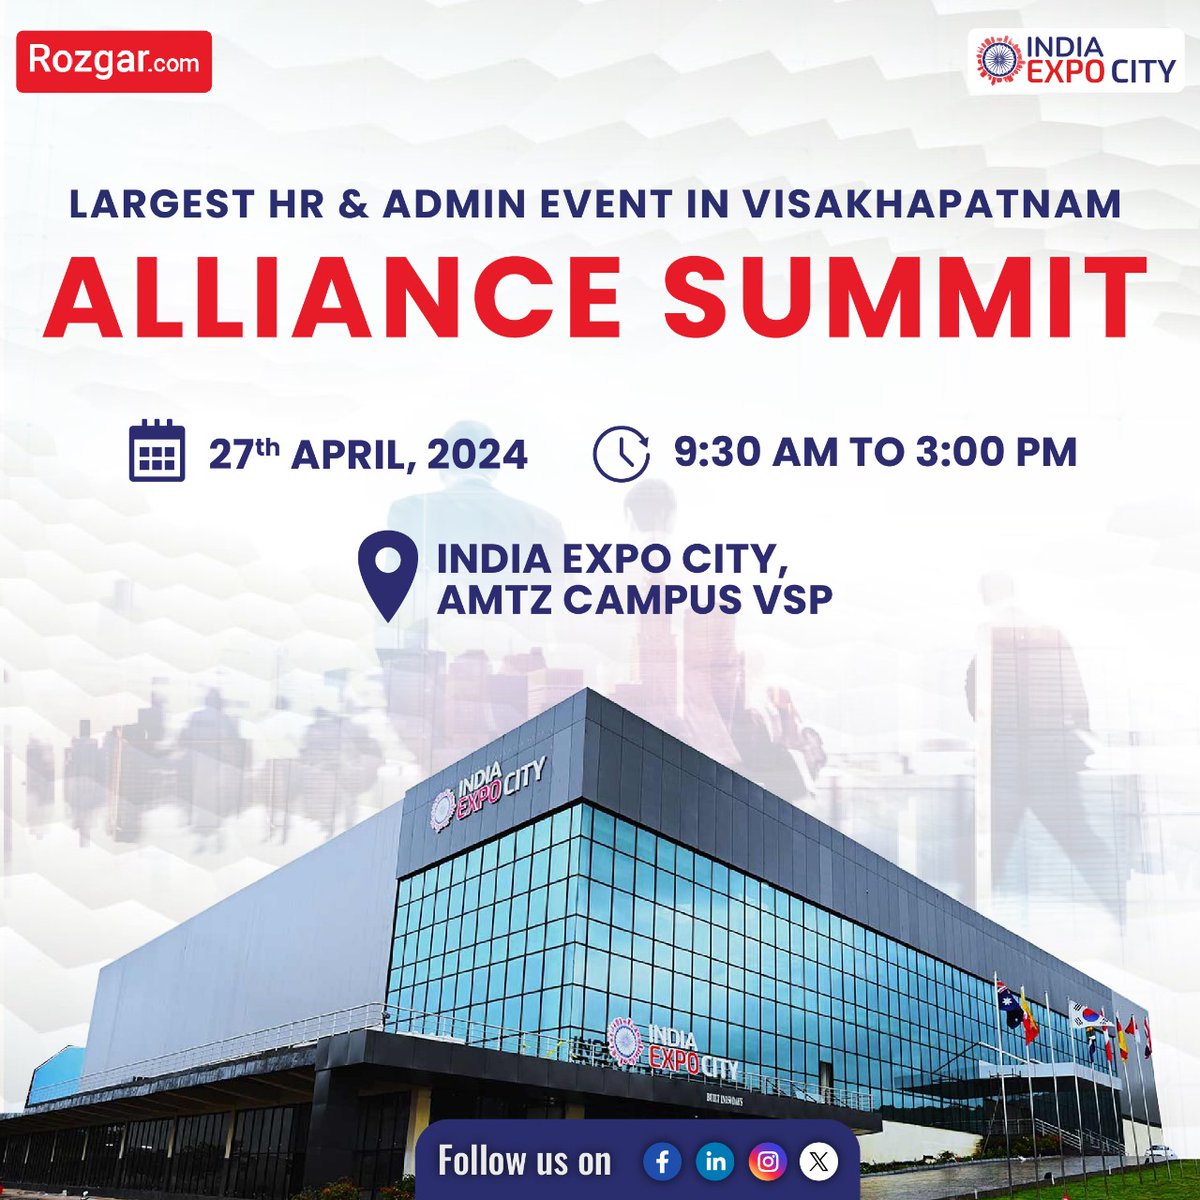 🌟 Join us at the #AllianceSummit on April 27th, 2024, at India Expo City, #Visakhapatnam! 🚀 

#rozgar #HR #Admin #networking #industryleaders #vizag #indiaexpocity #event #summit #conference #iec #participants #opportunities #business #keynotes #panelist #collaboration